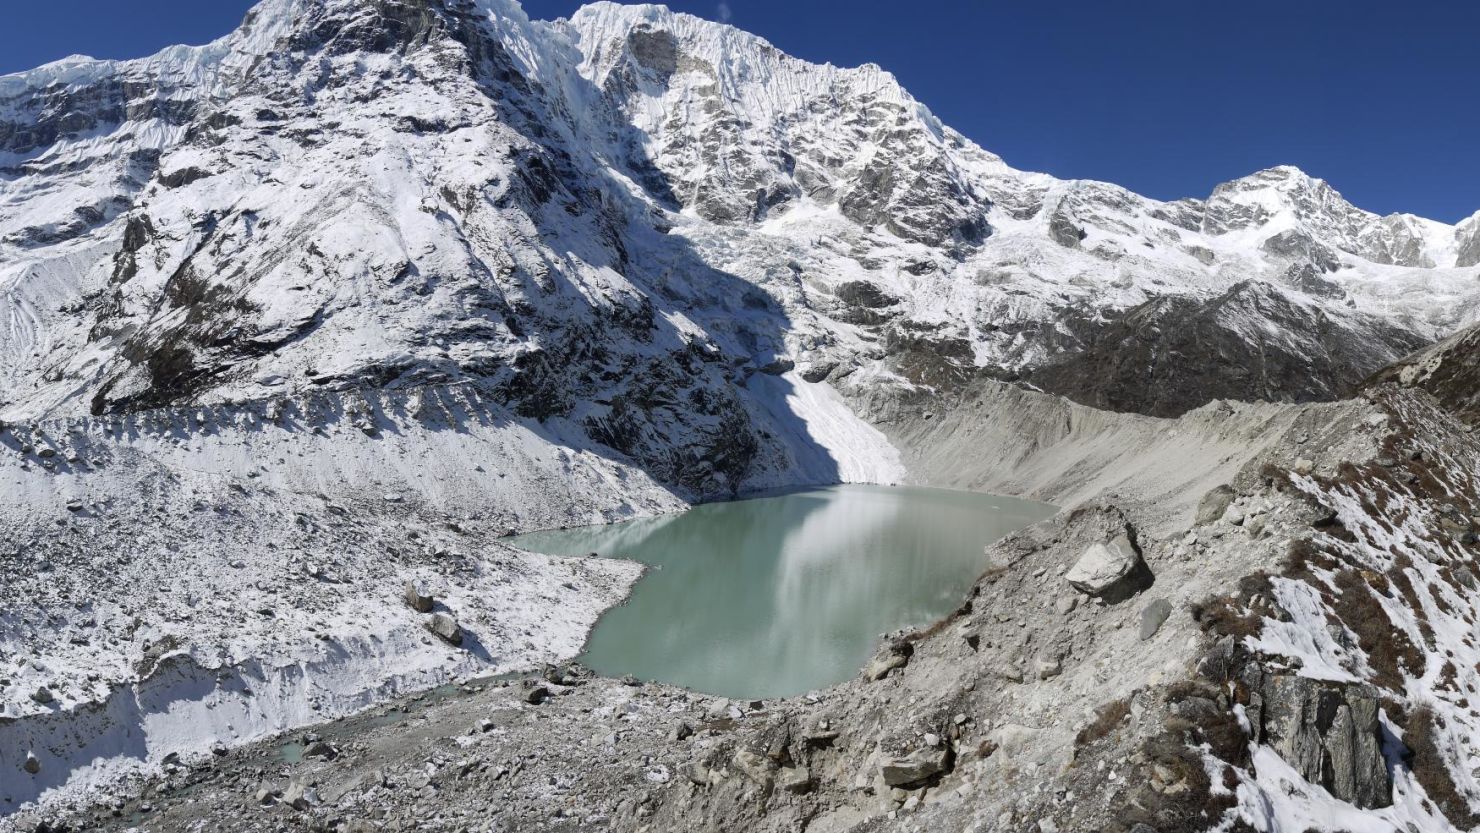 Dig Tsho in the Langmoche valley, Khumbu Himal, Nepal. This lake breached 1985 due to an ice avalanche-induced impulse wave, causing catastrophic damage downstream.